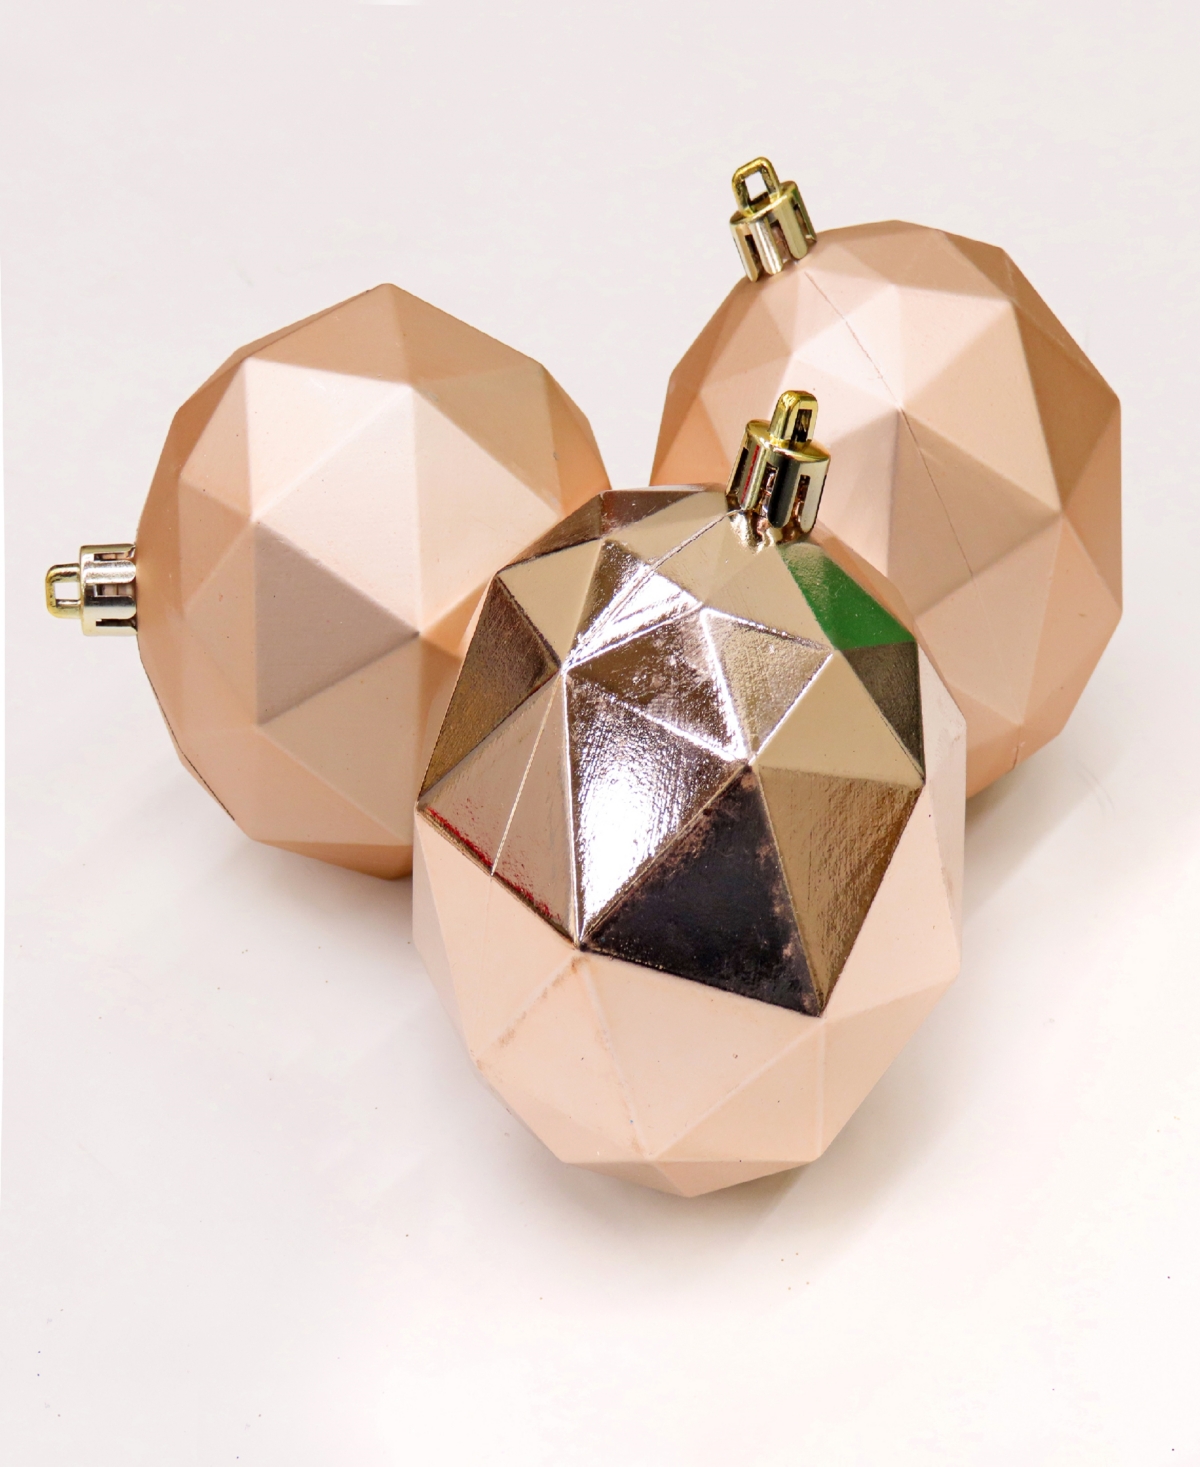 Shop National Tree Company First Traditions 6-piece Shatterproof Geometric Ornaments In Gold